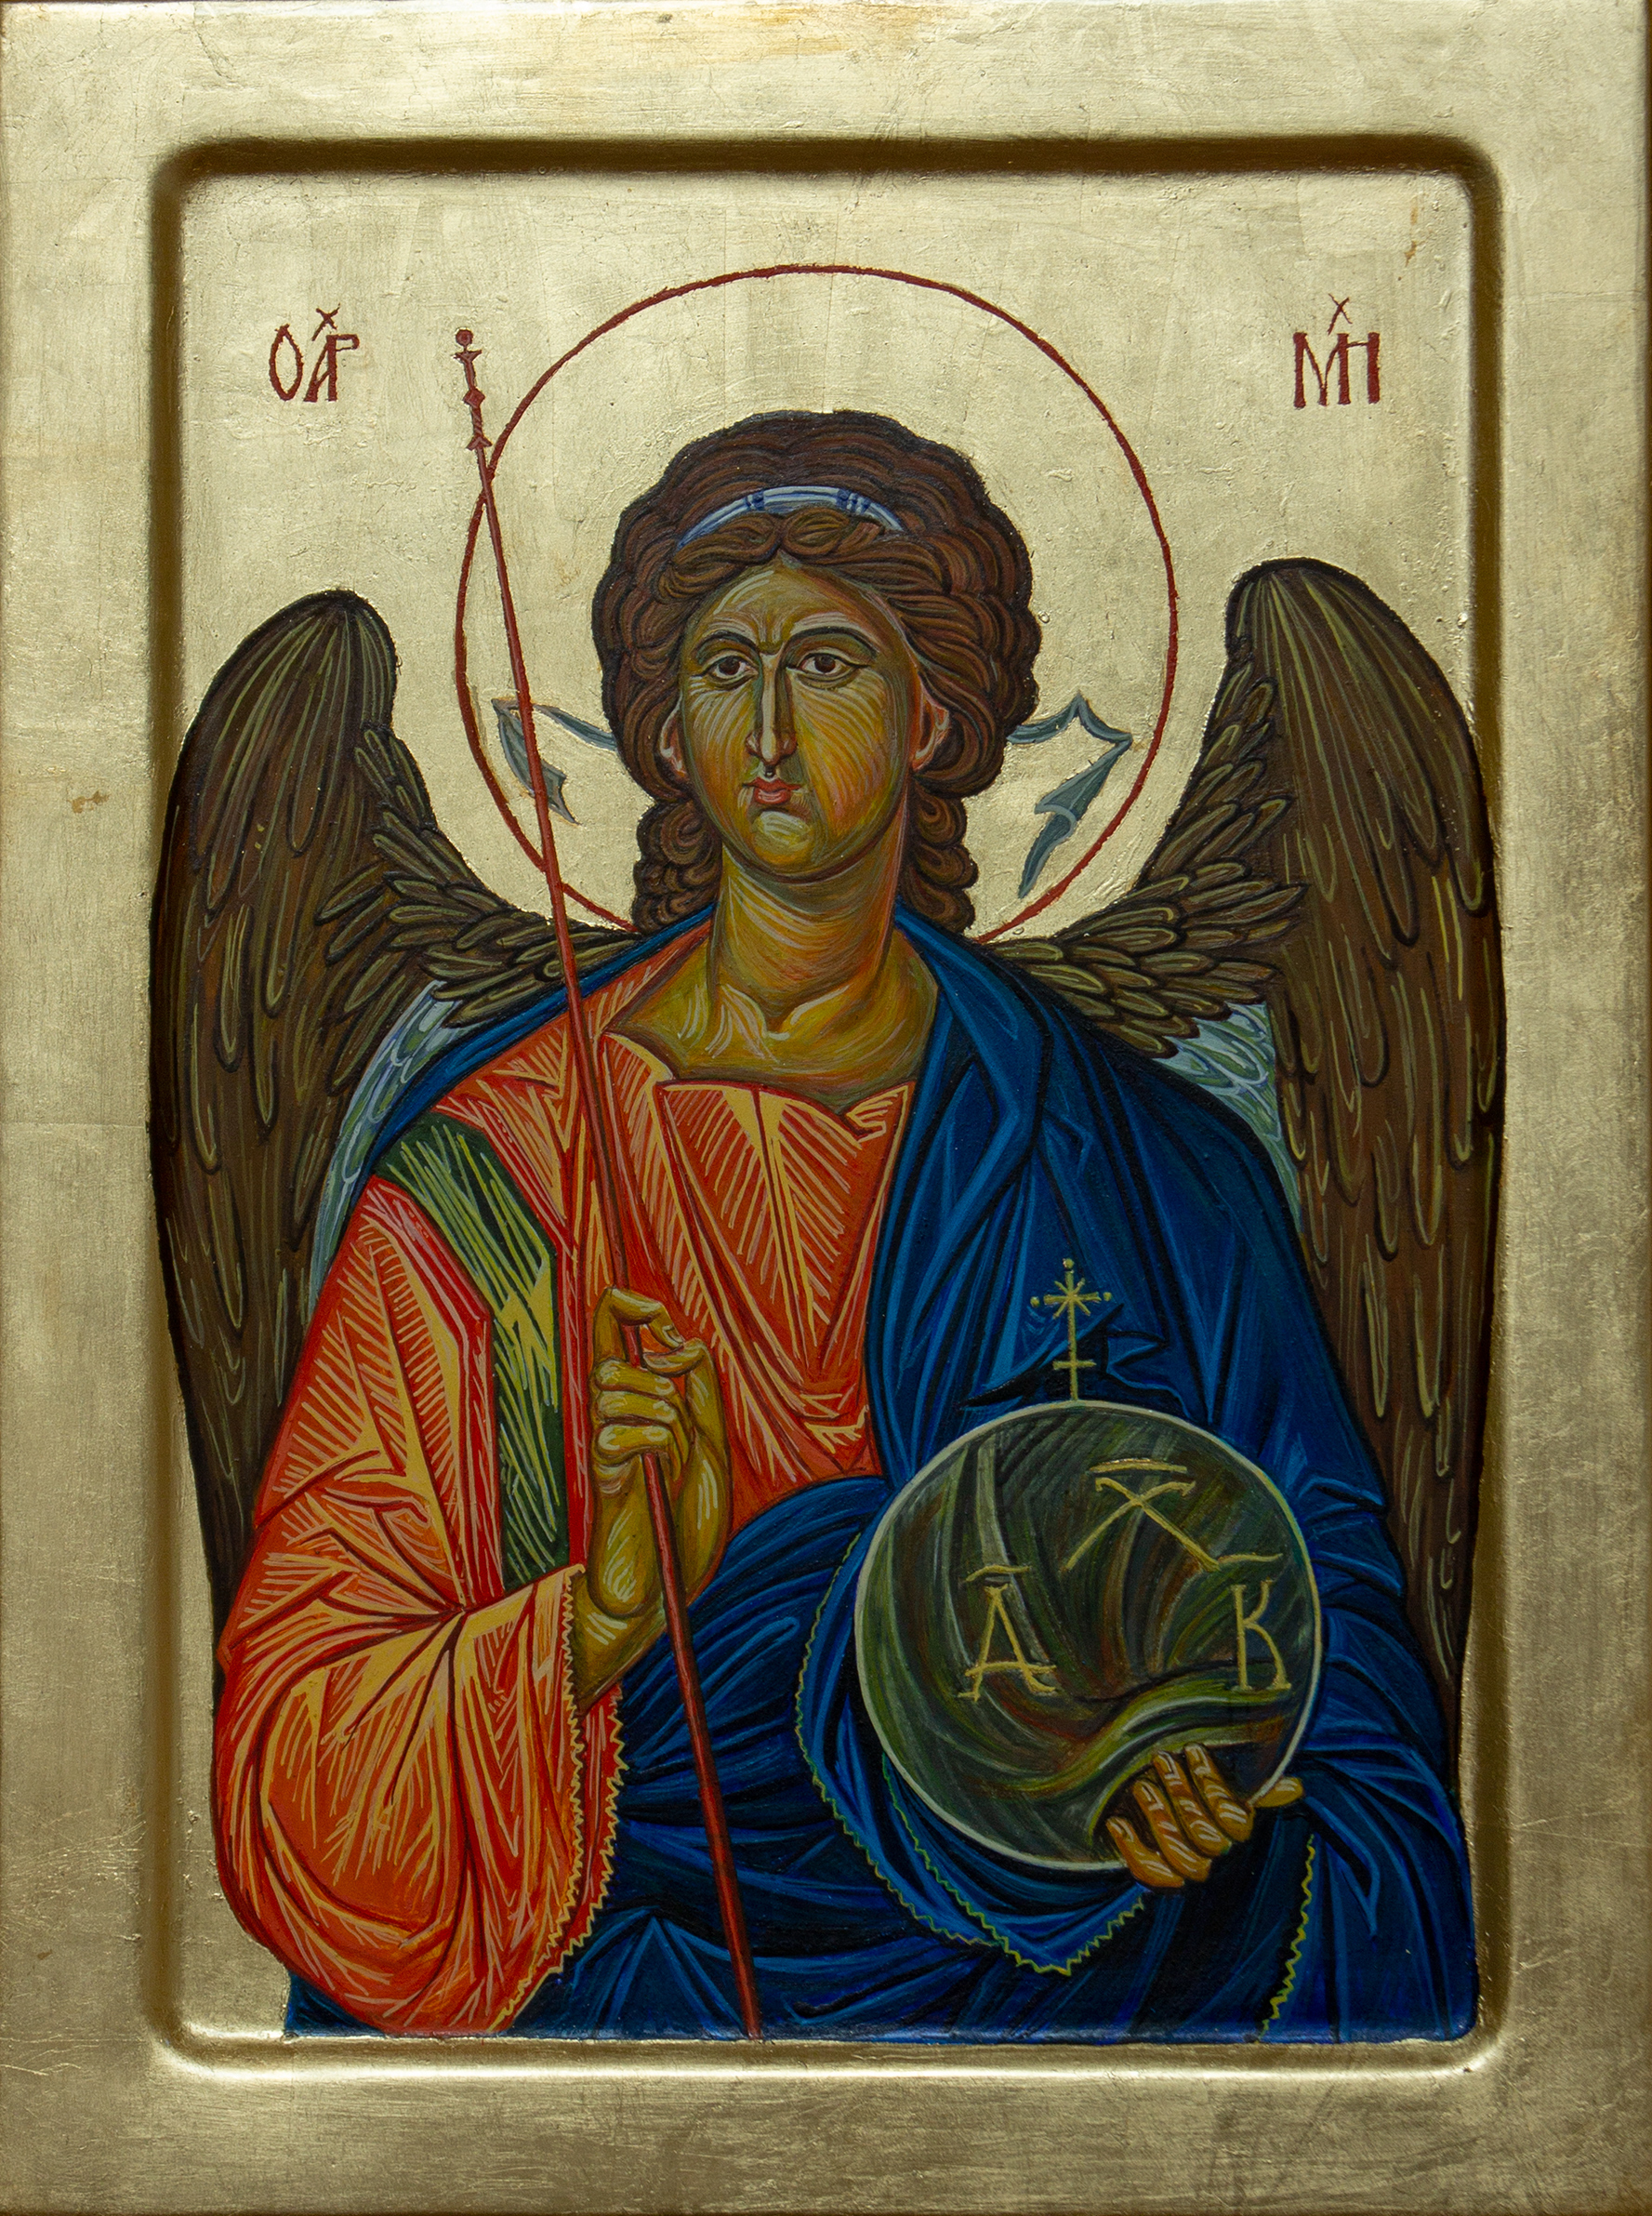 Archangel Michael (Arhađel Mihailo) - 40x30cm Commissioned Byzantine Icon egg tempera on wood with gold leaf - Hand painted by artist Milica MARUŠIĆ